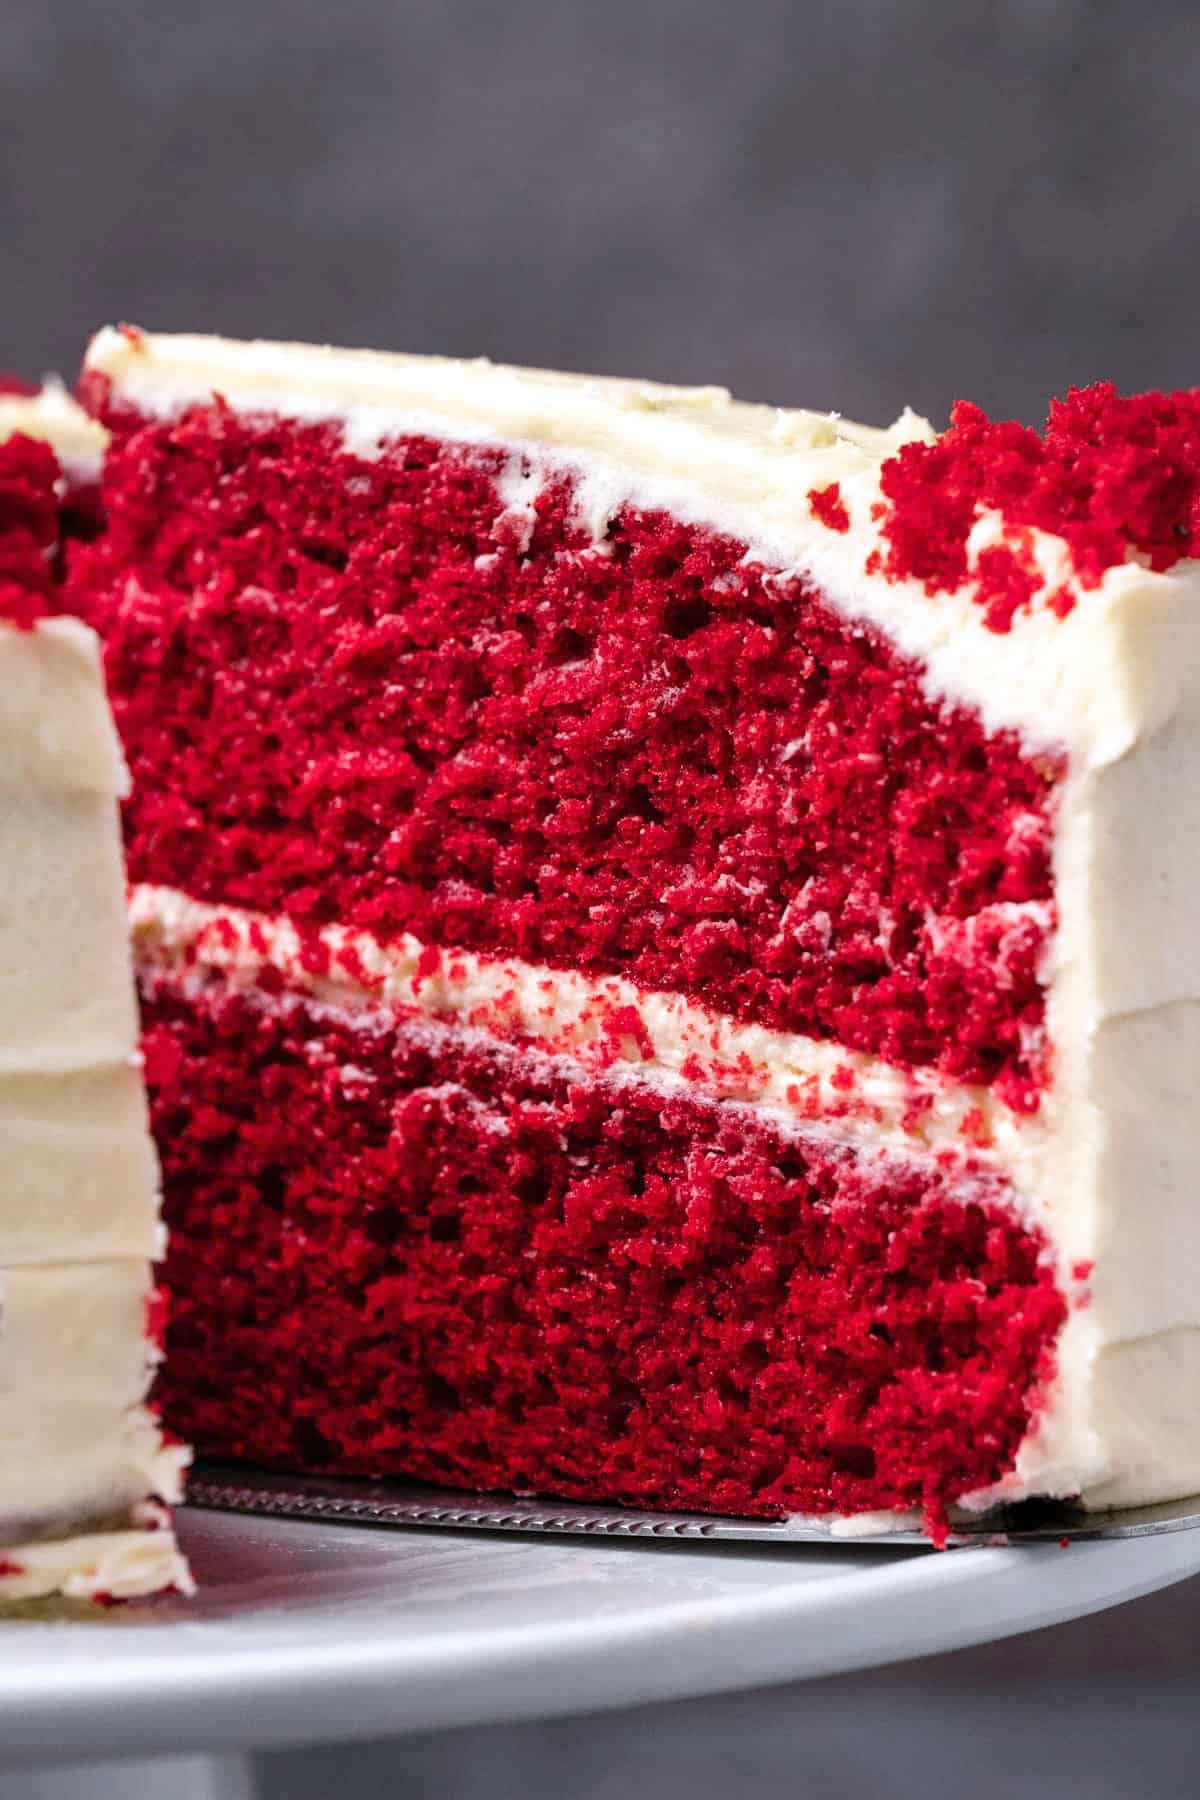 What Flavor Is Red Velvet? Interesting Facts About The Famous Cake